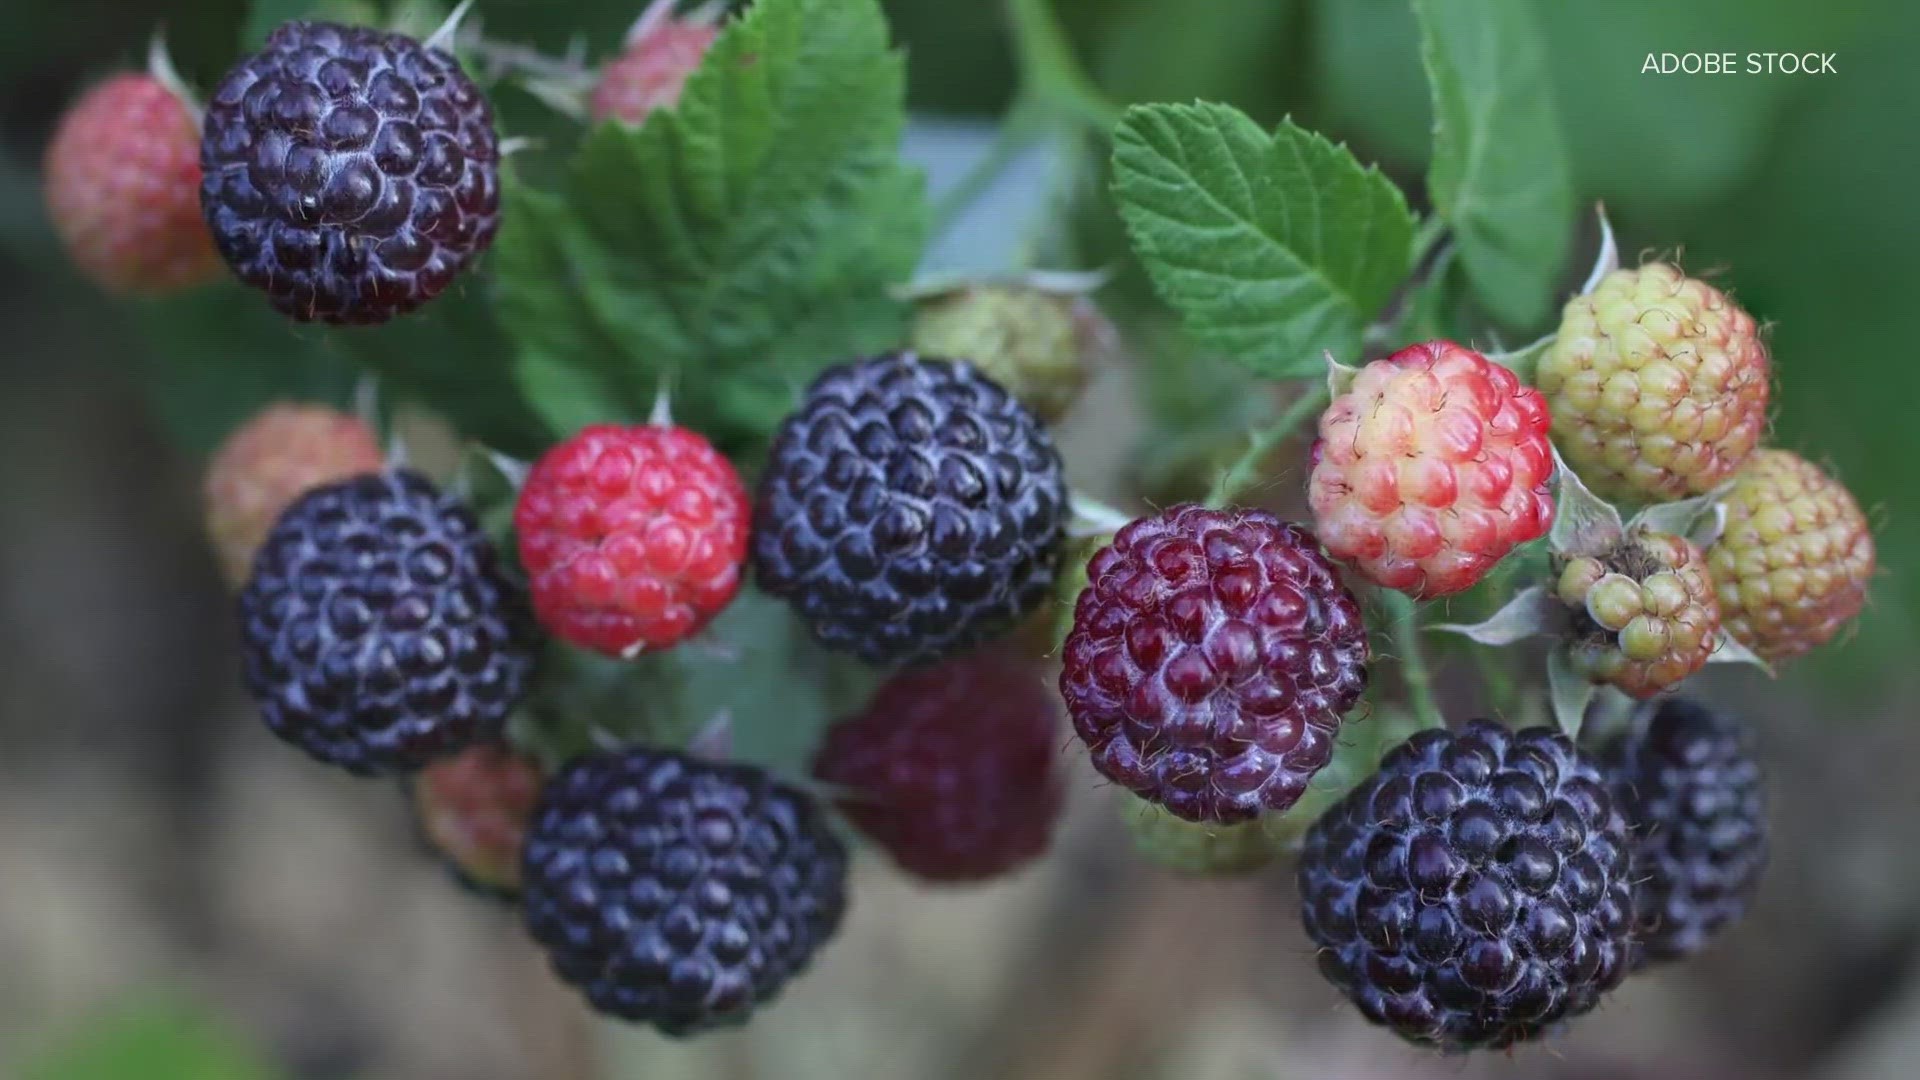 From Friday to Sunday, guests can pick their own black raspberries for $4.99 per six ounces. Six-ounce containers will also be available for purchase in the store.